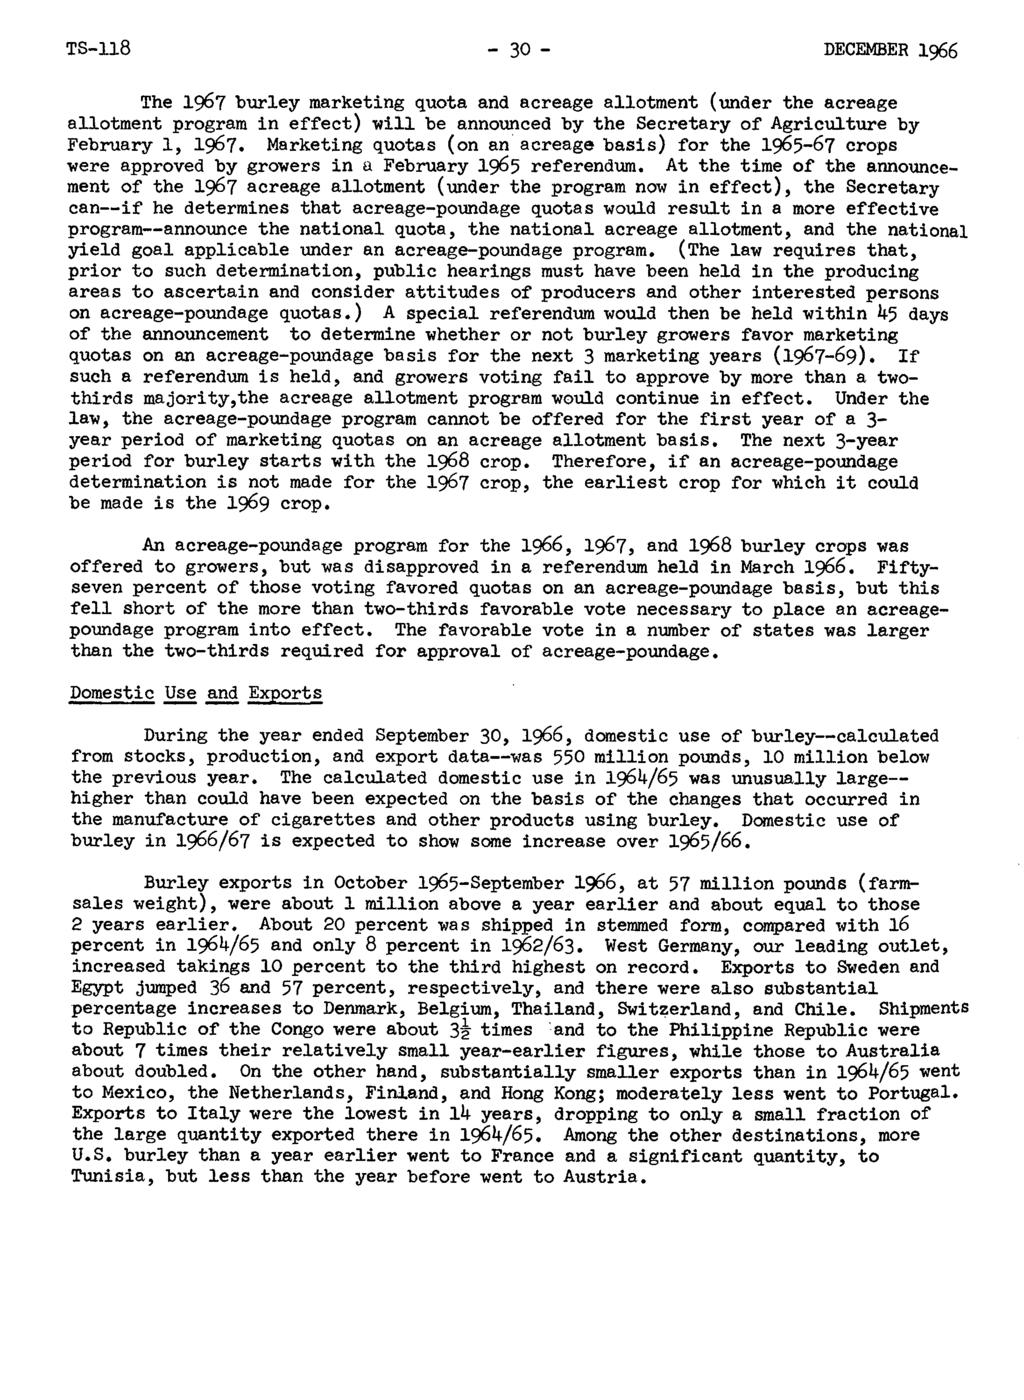 TS-ll8-3- DECEMBER 1966 The 1967 burley marketing quota and acreage allotment (under the acreage allotment program in effect) will be announced by the Secretary of Agriculture by February 1, 1967.